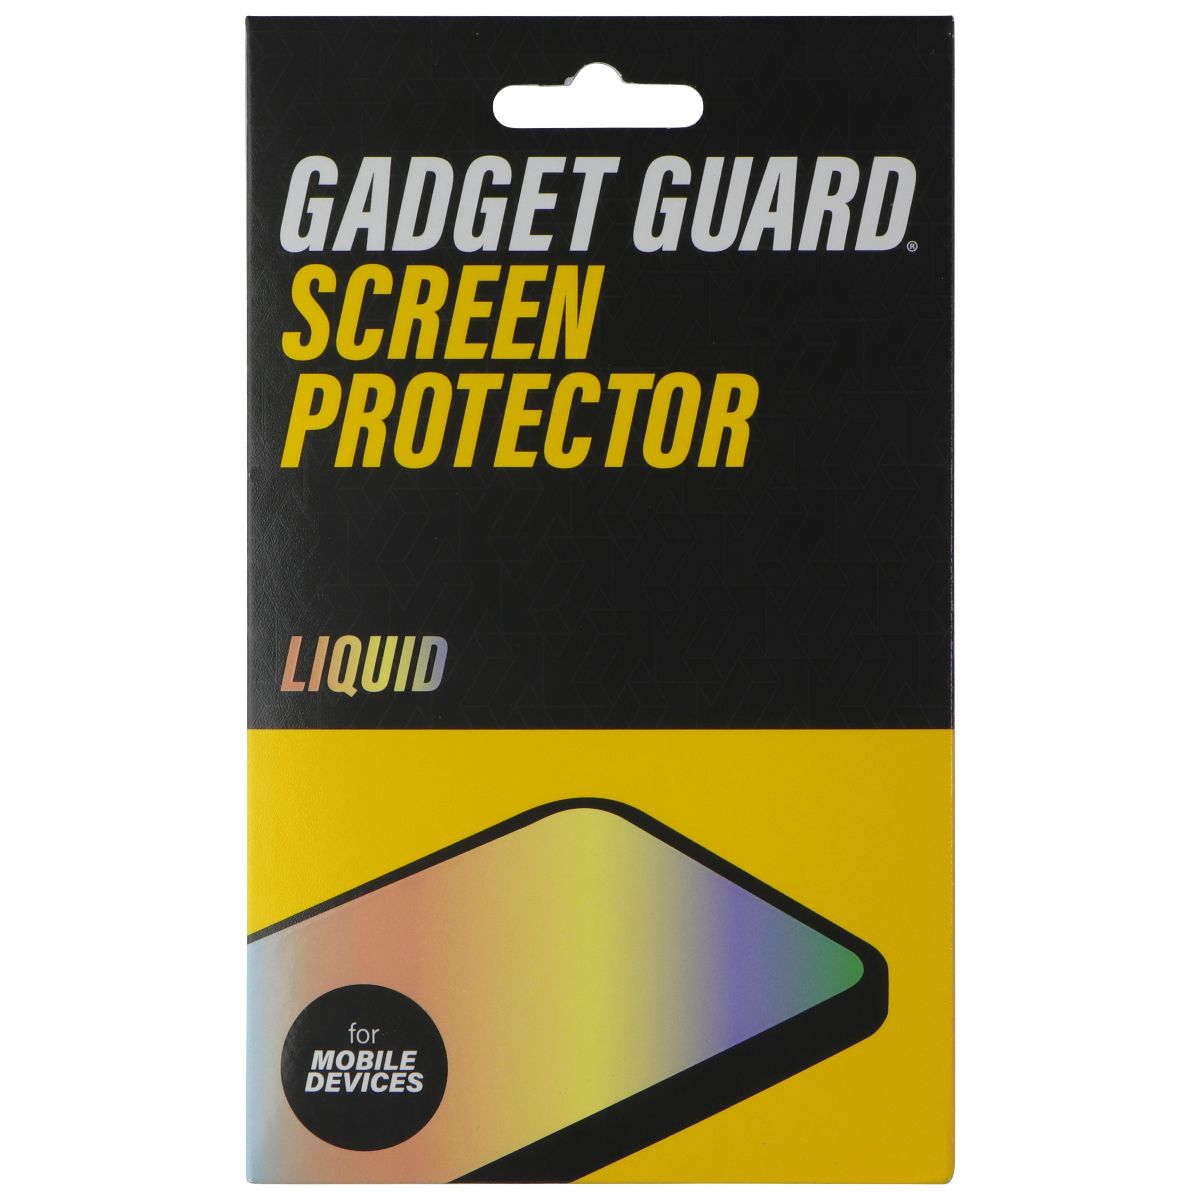 Gadget Guard Liquid Screen Protector for Mobile Devices